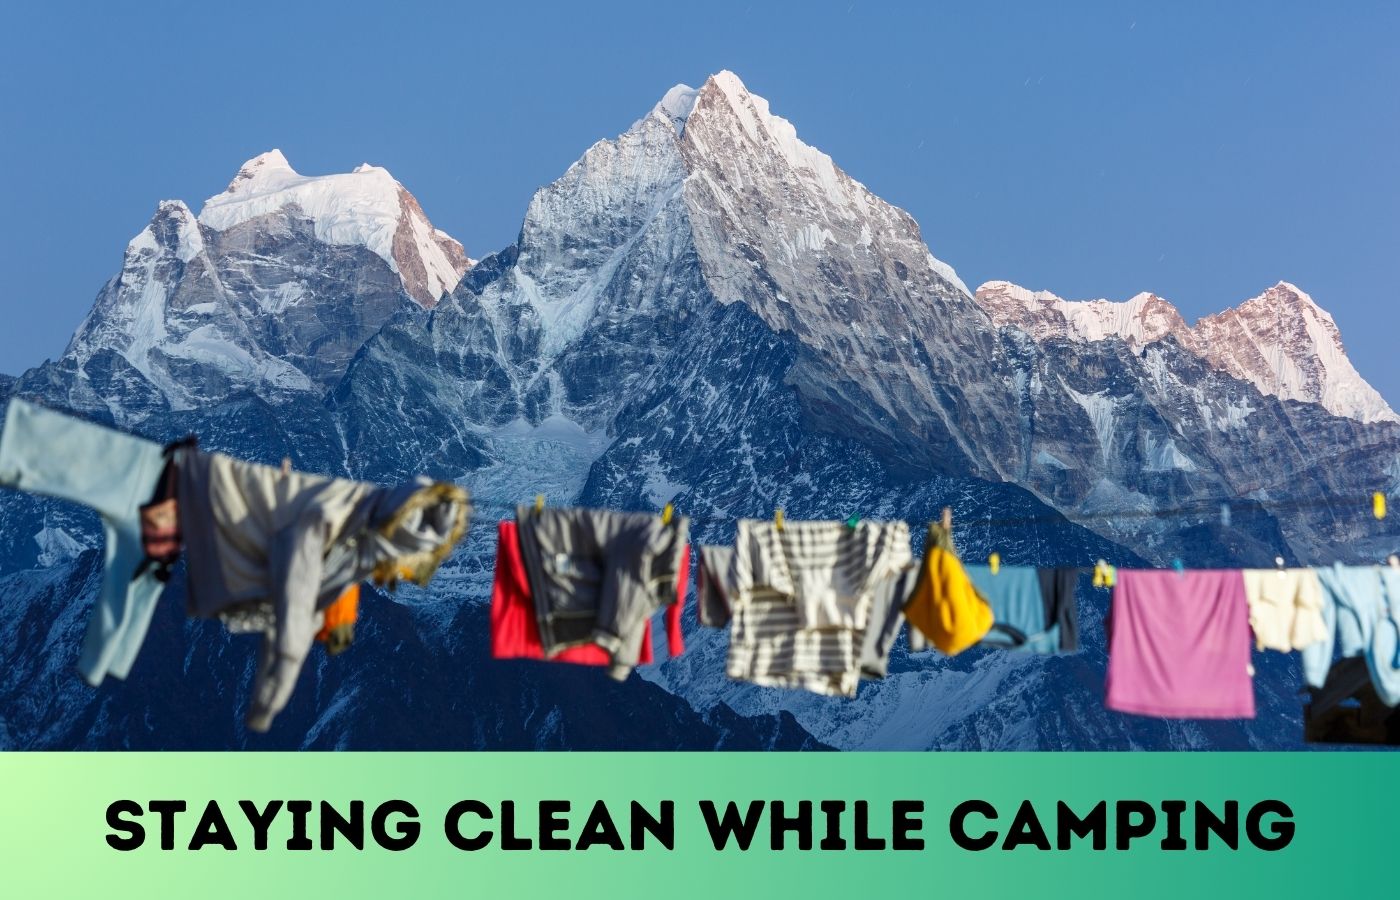 A camper's clothes drying. Mountains in back.